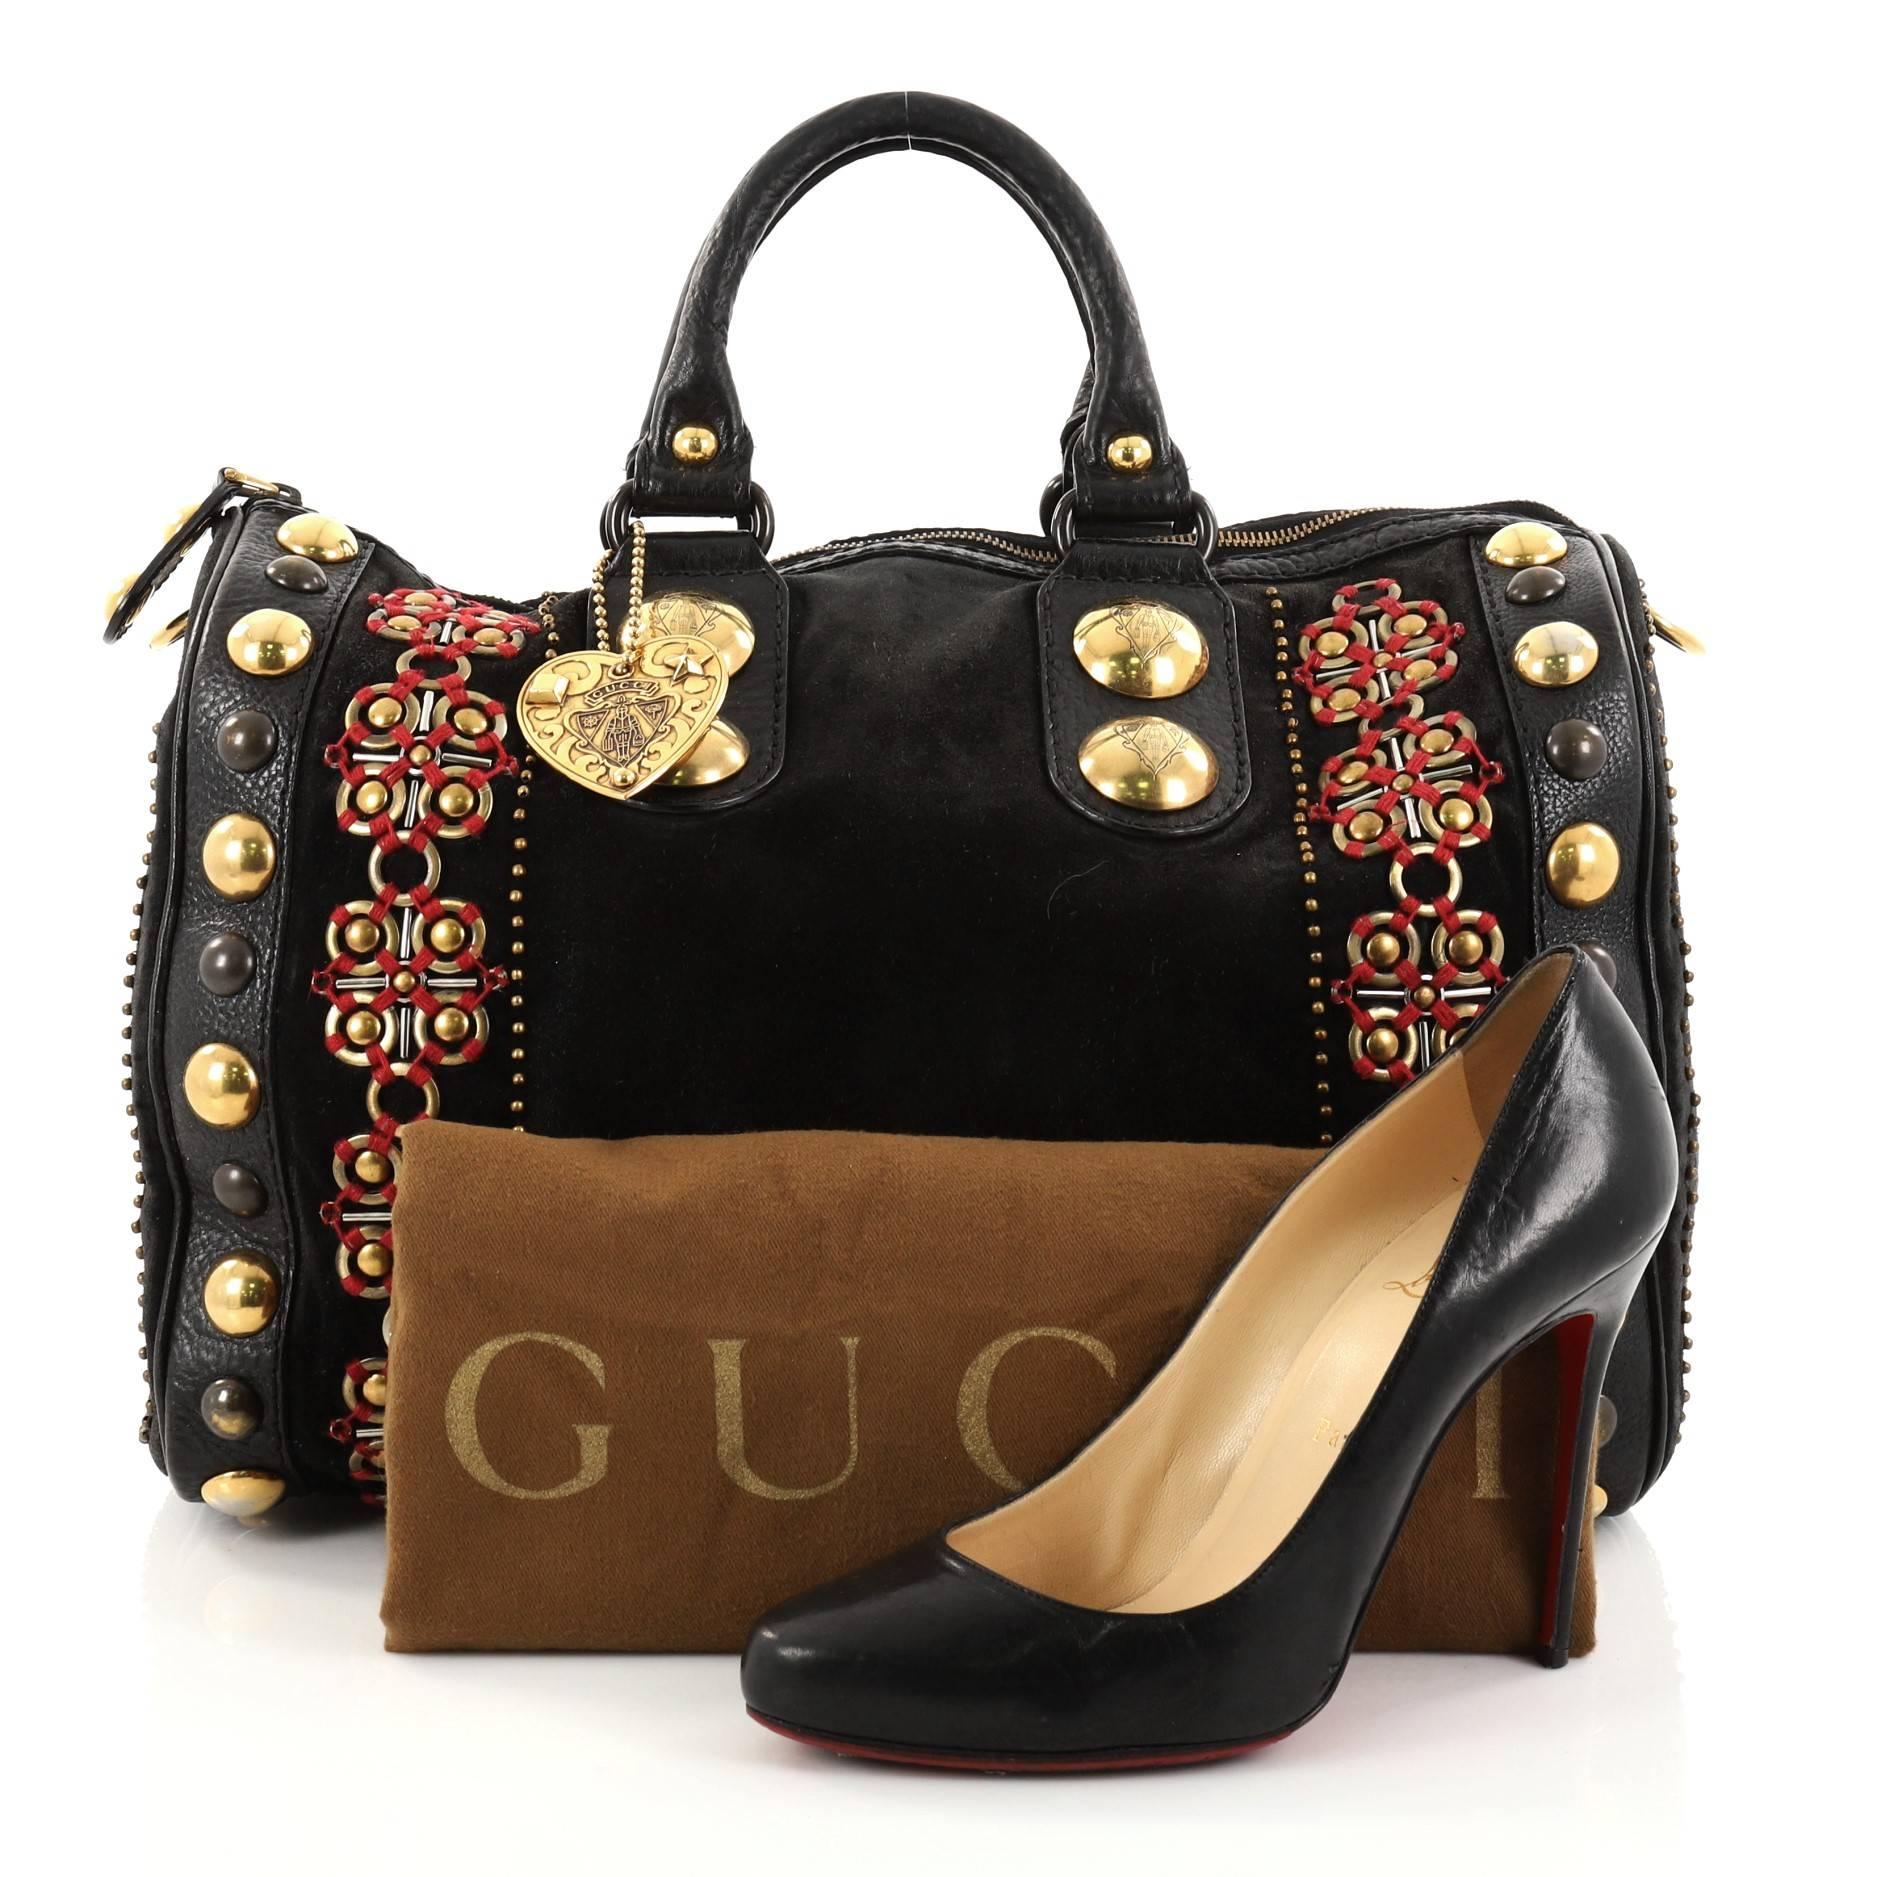 This authentic Gucci Babouska Boston Bag Embellished Suede Large is luxurious in design perfect for everyday use. Crafted in black suede, this luxuriously adorned boston bag features dual-rolled handles, gold Gucci heart medallion, all-around